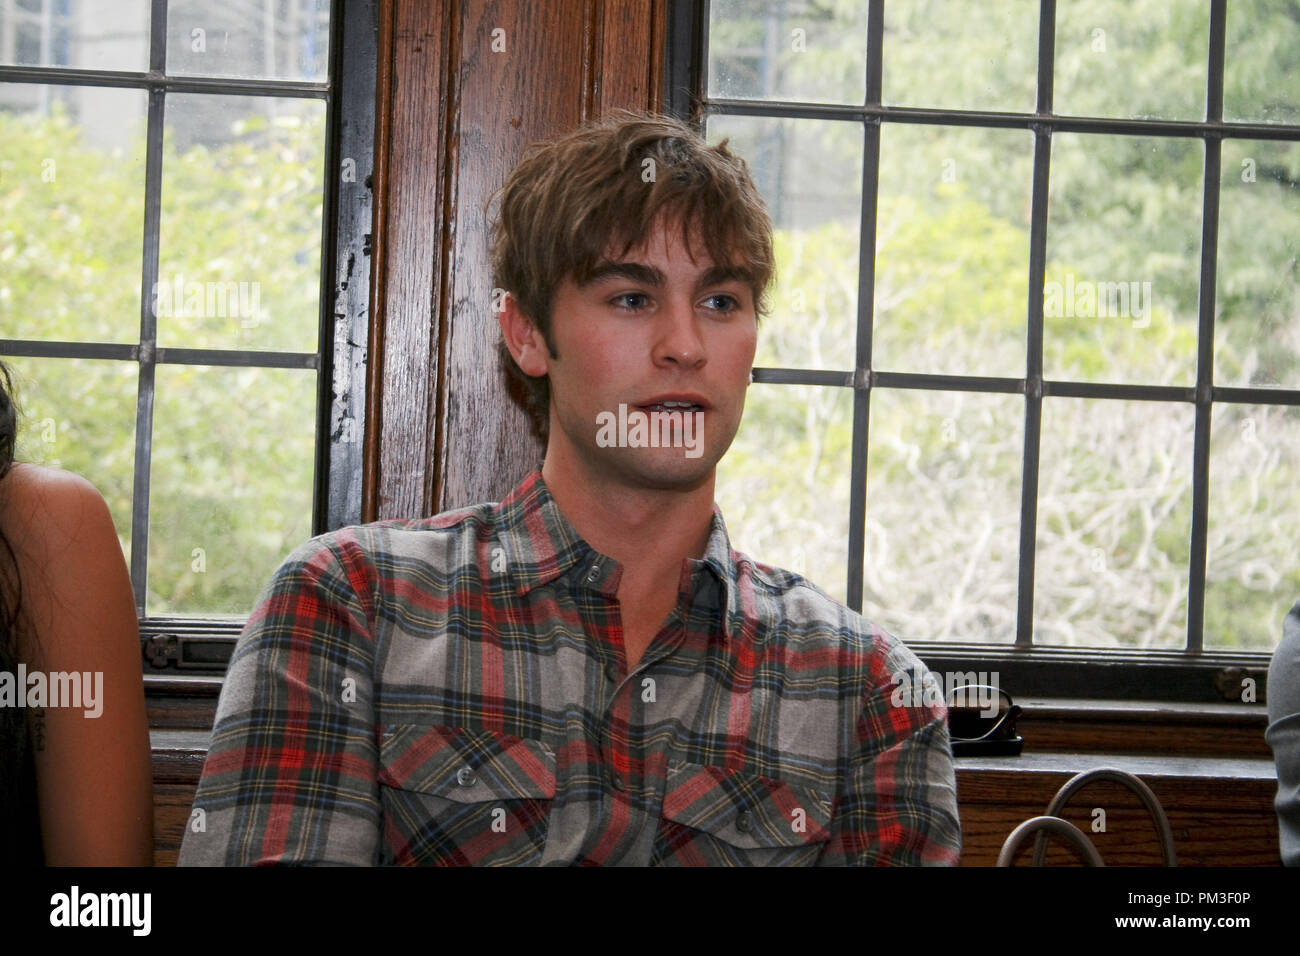 Chace Crawford 'Gossip Girl' Portrait Session, September 23, 2010.  Reproduction by American tabloids is absolutely forbidden. File Reference # 30507 015JRC  For Editorial Use Only -  All Rights Reserved Stock Photo